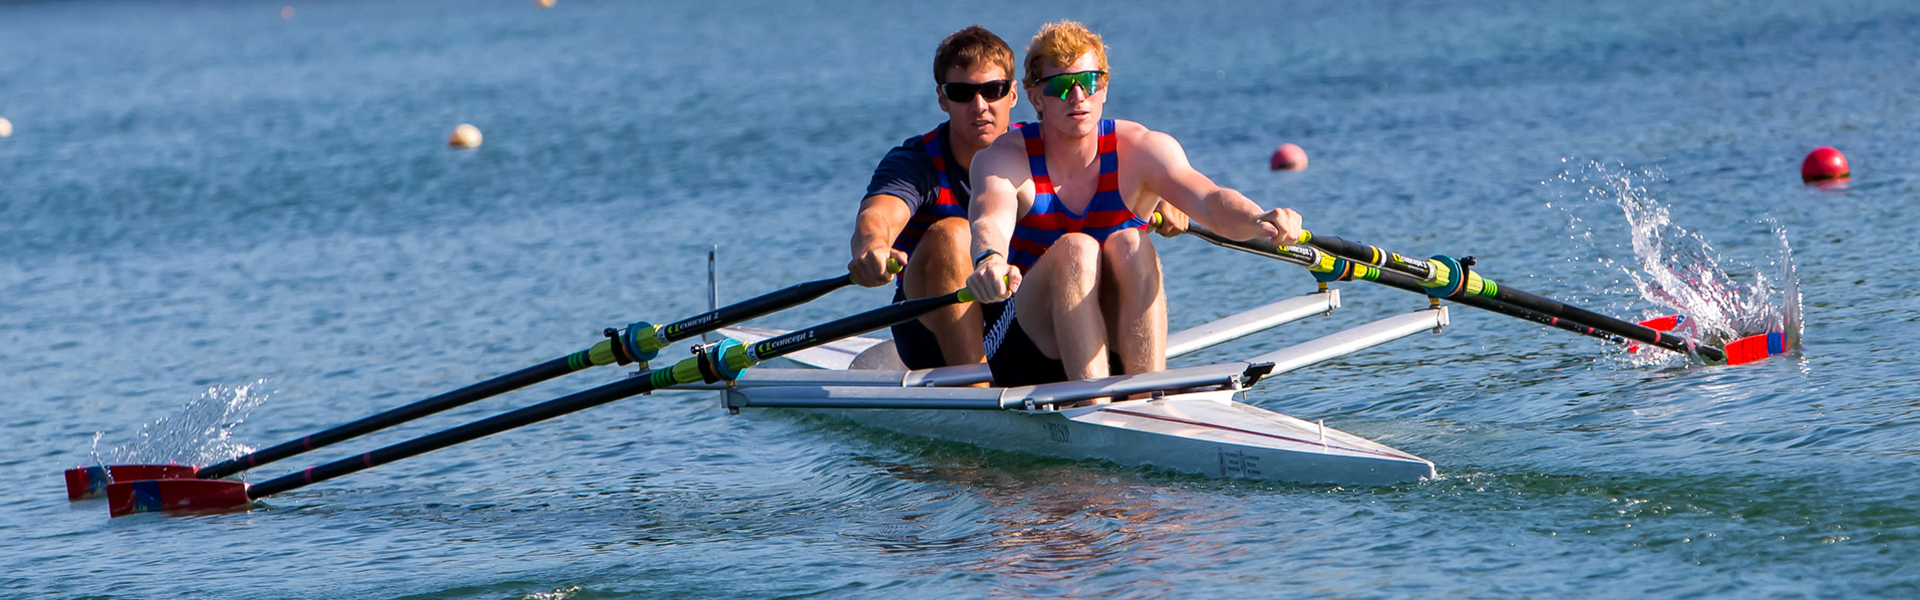 image of two young men rowing on the waterway